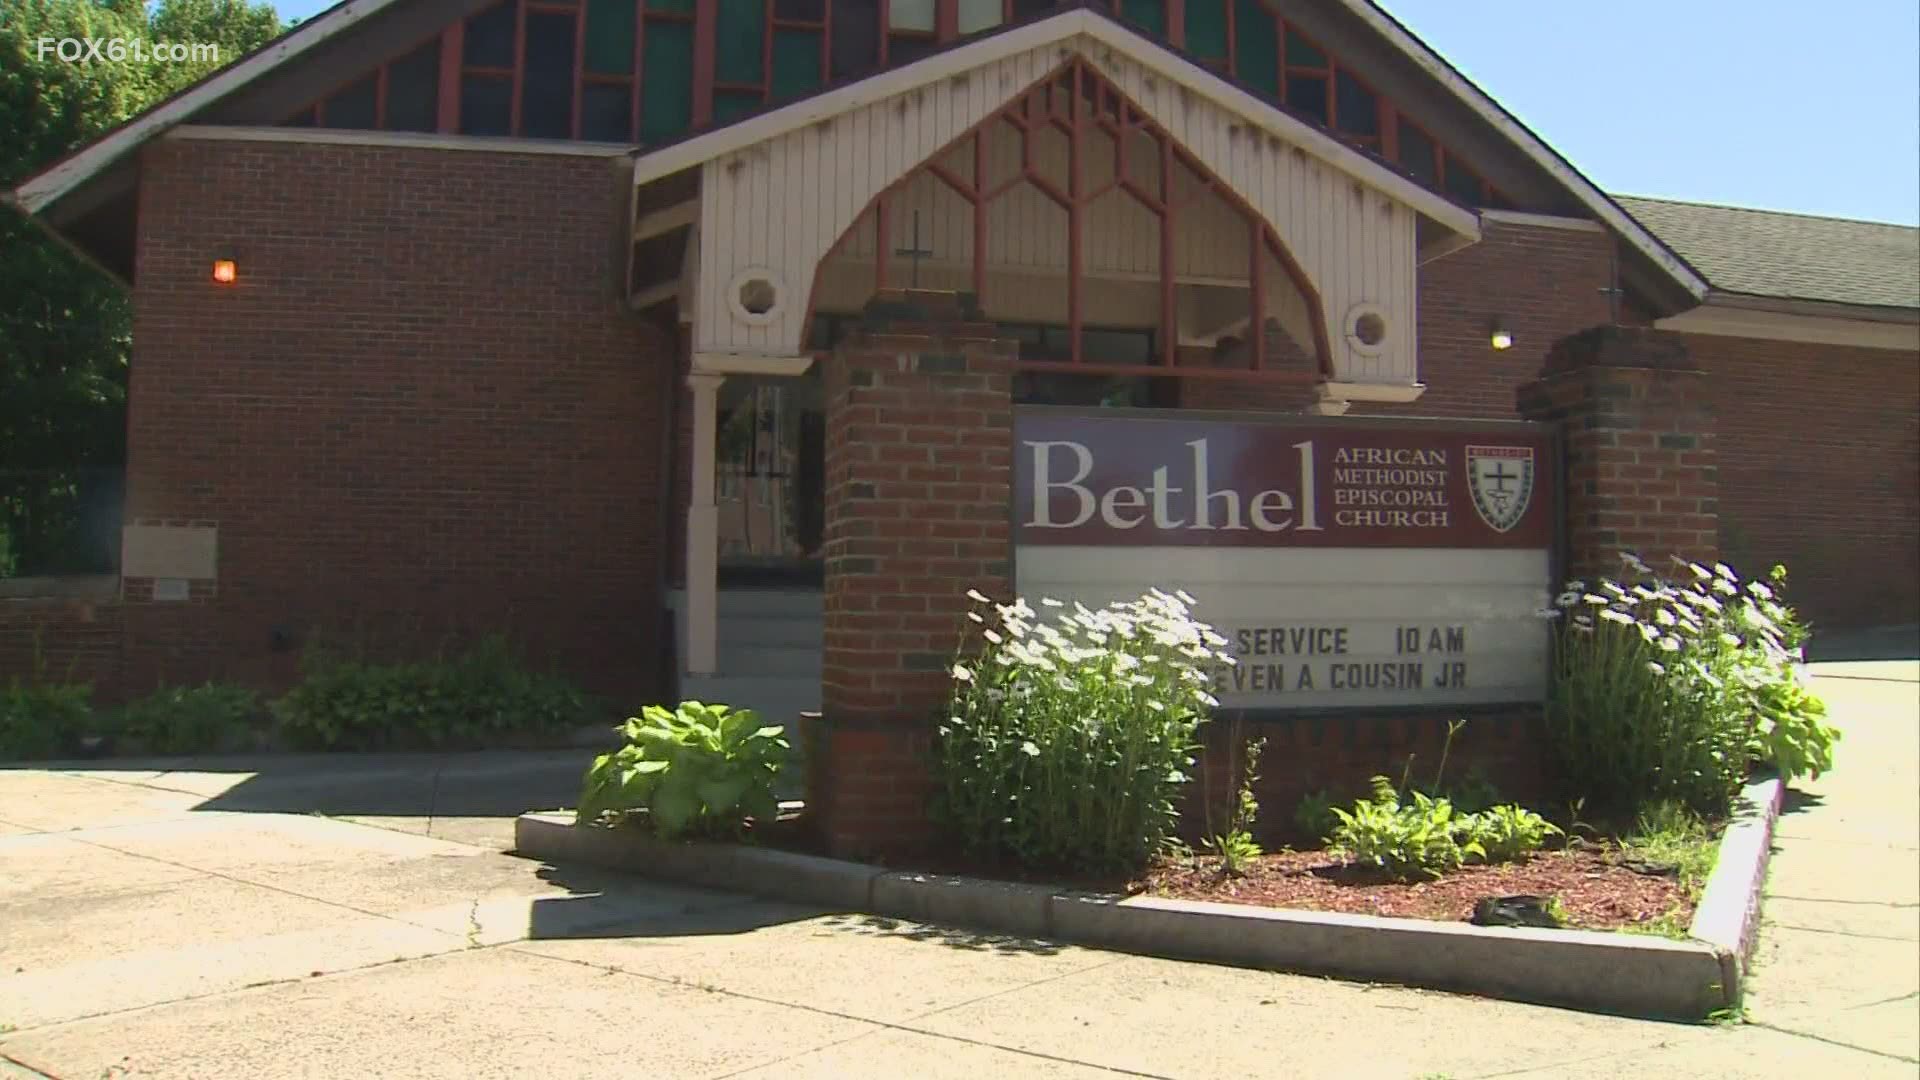 The Bethel AE Church was hit by 11 rounds of gunfire.